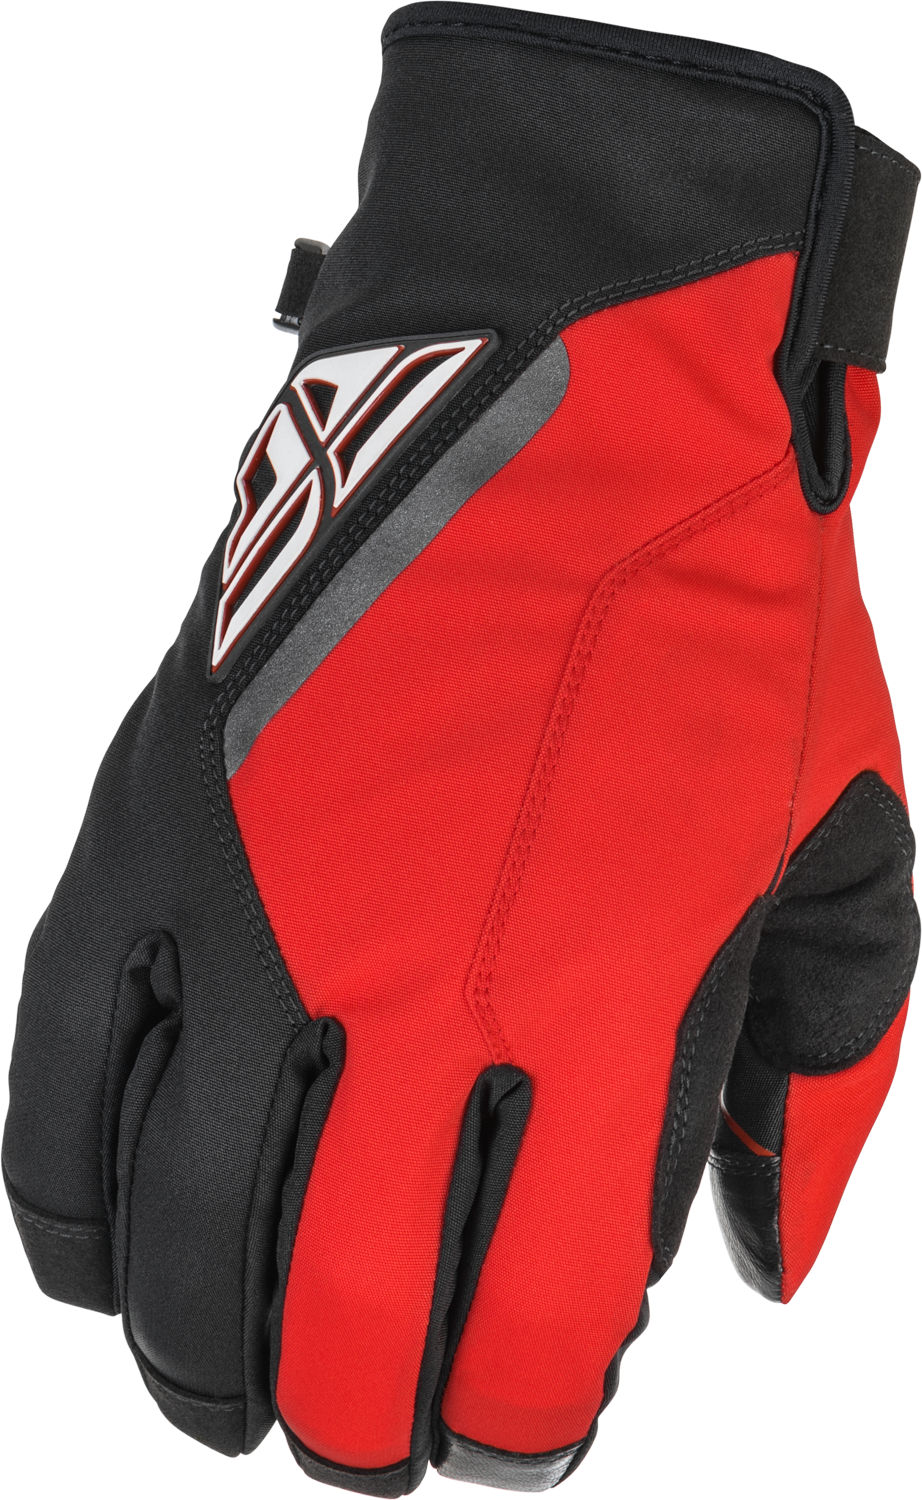 FLY RACING Title Gloves Black/Red Sz 09 371-05309